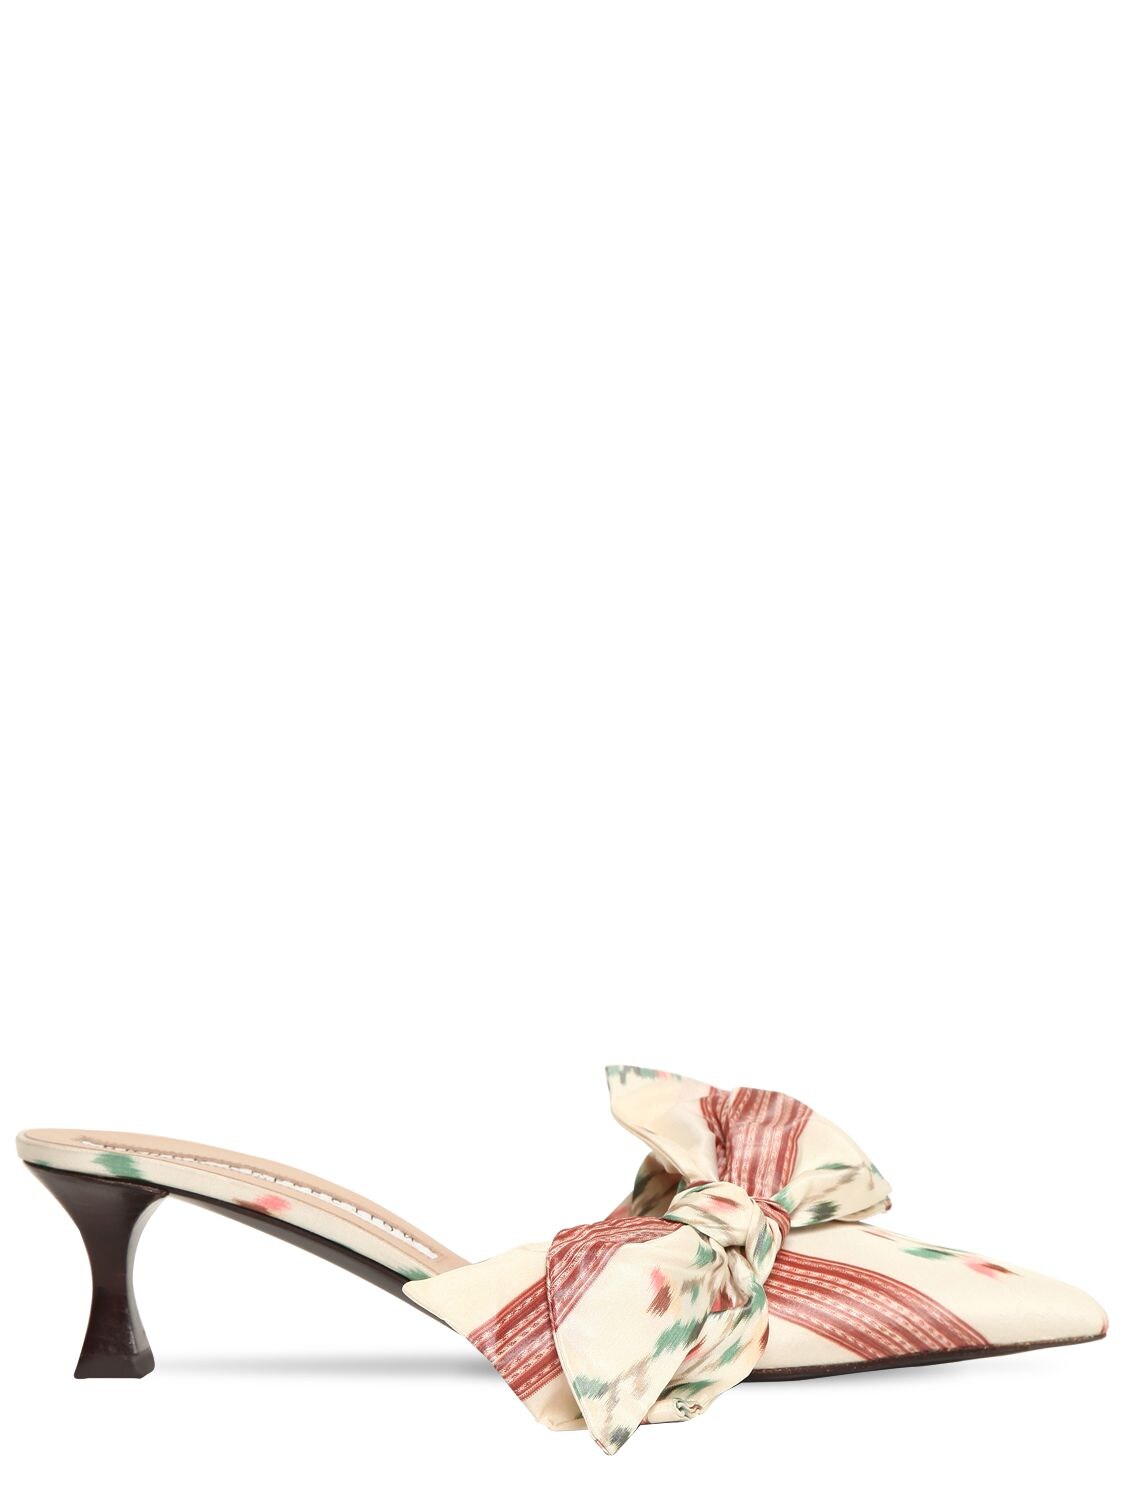 Tabitha Simmons For Brock Collection 50mm Satin Mules W/ Bow In Multi,ivory